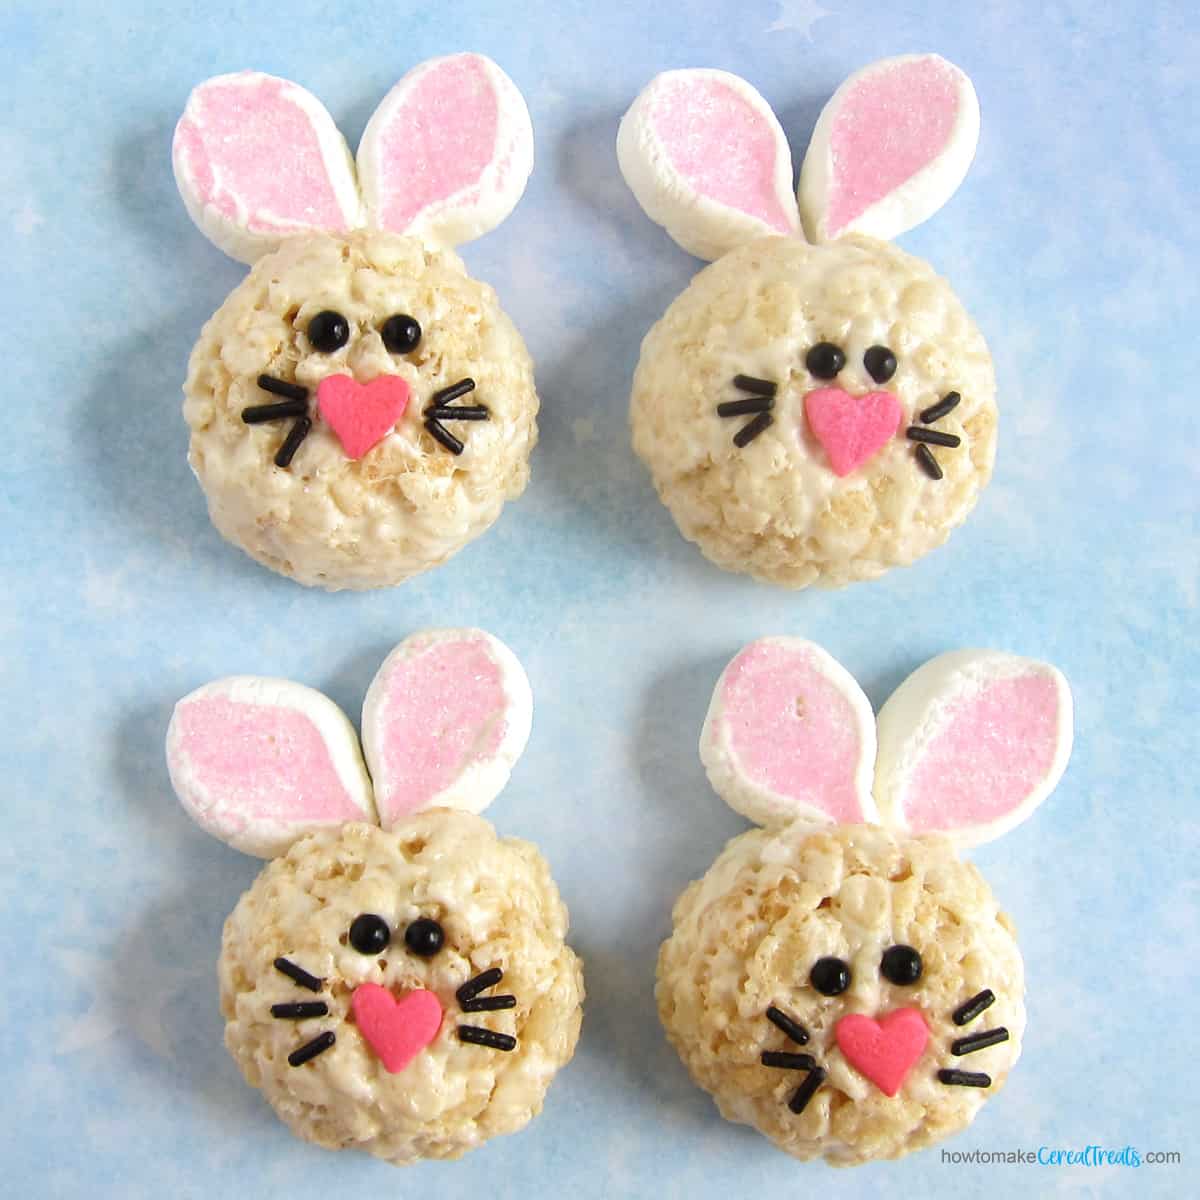 rice crispy treat bunnies with marshmallow ears, heart-shaped noses, candy eyes, and sprinkle whiskers